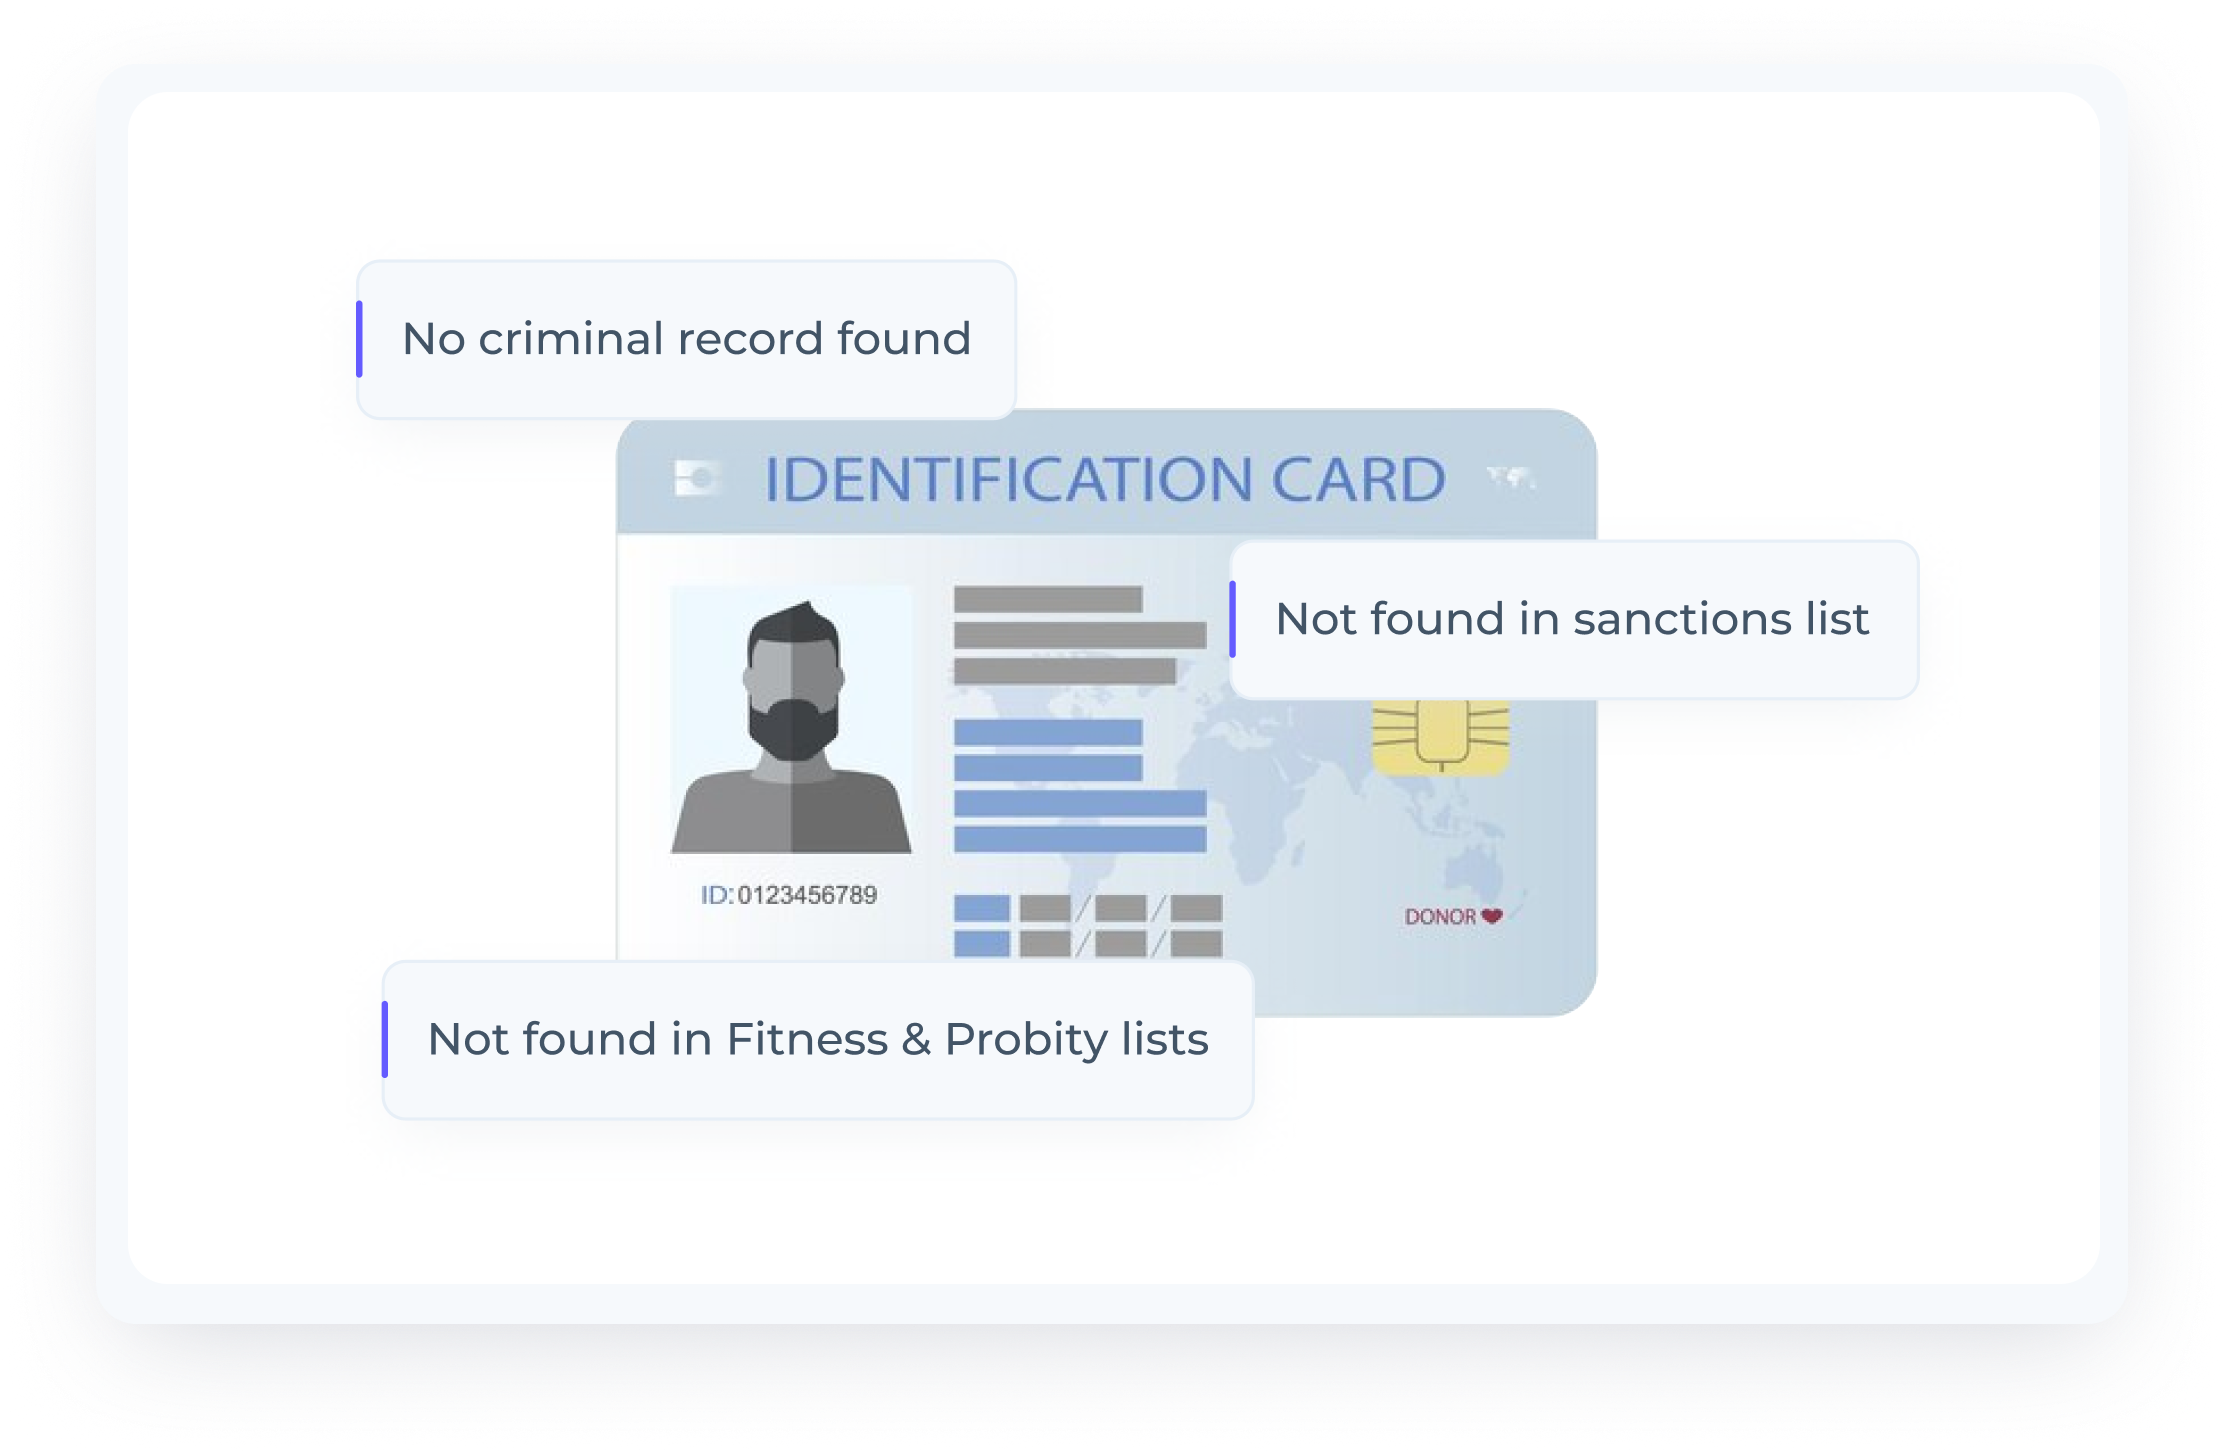 Results showing no criminal record from identification card screening of a person